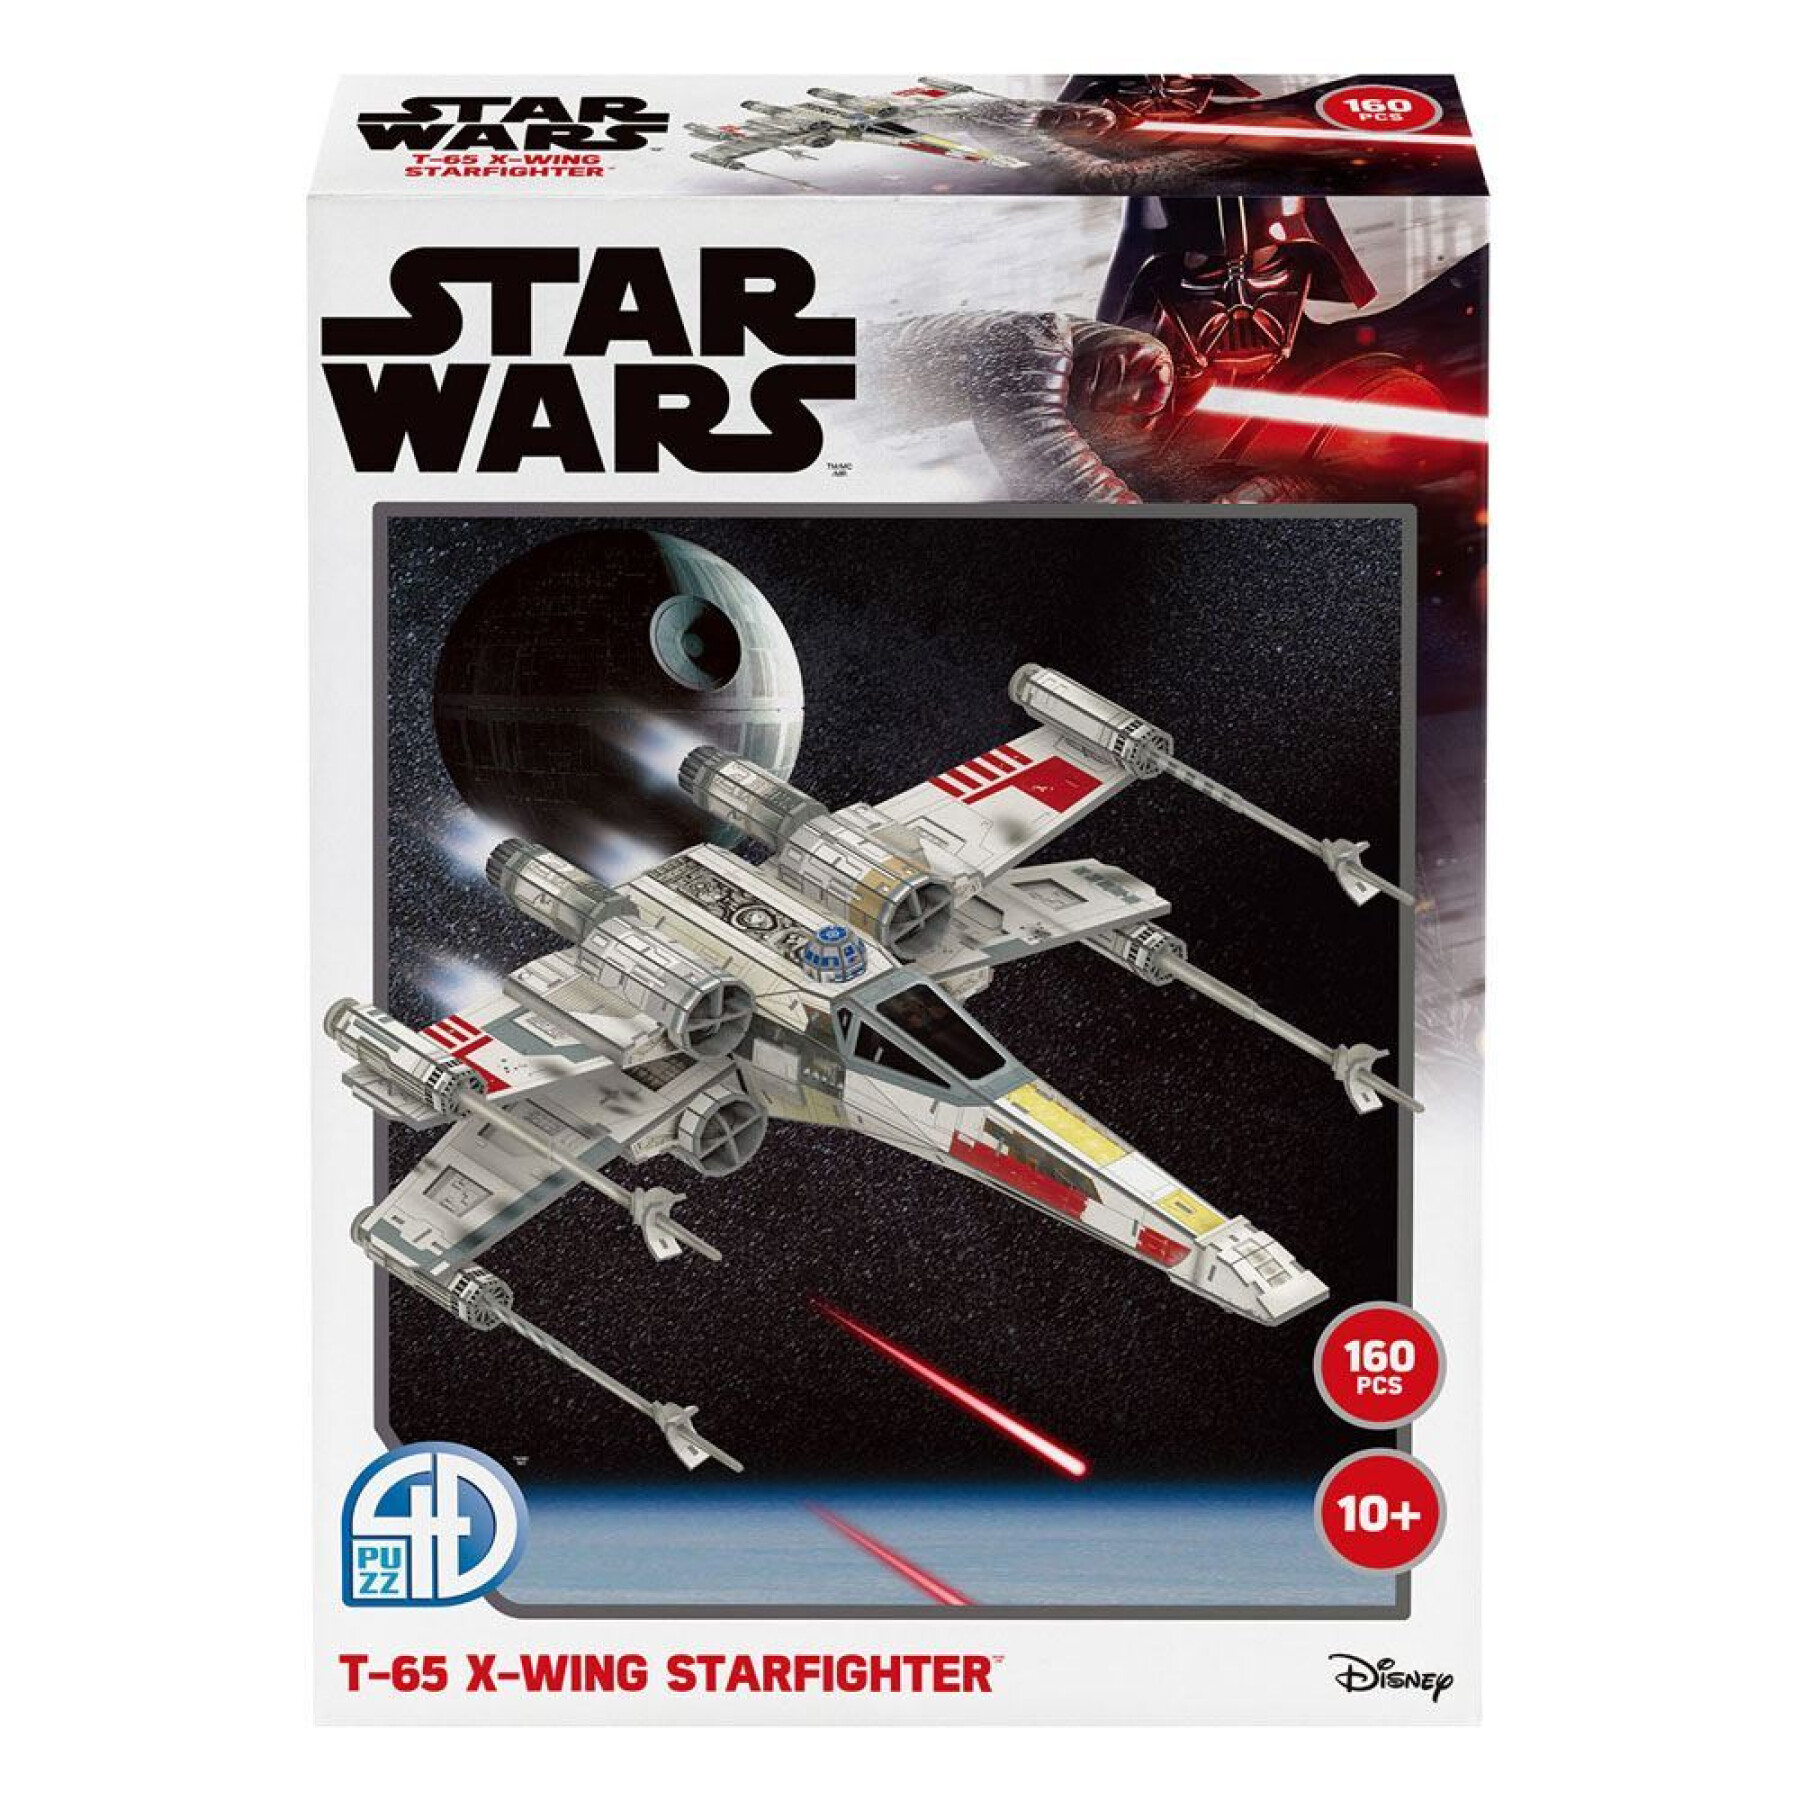 3d puzzle - t-65 x-wing starfighter Revell Star Wars